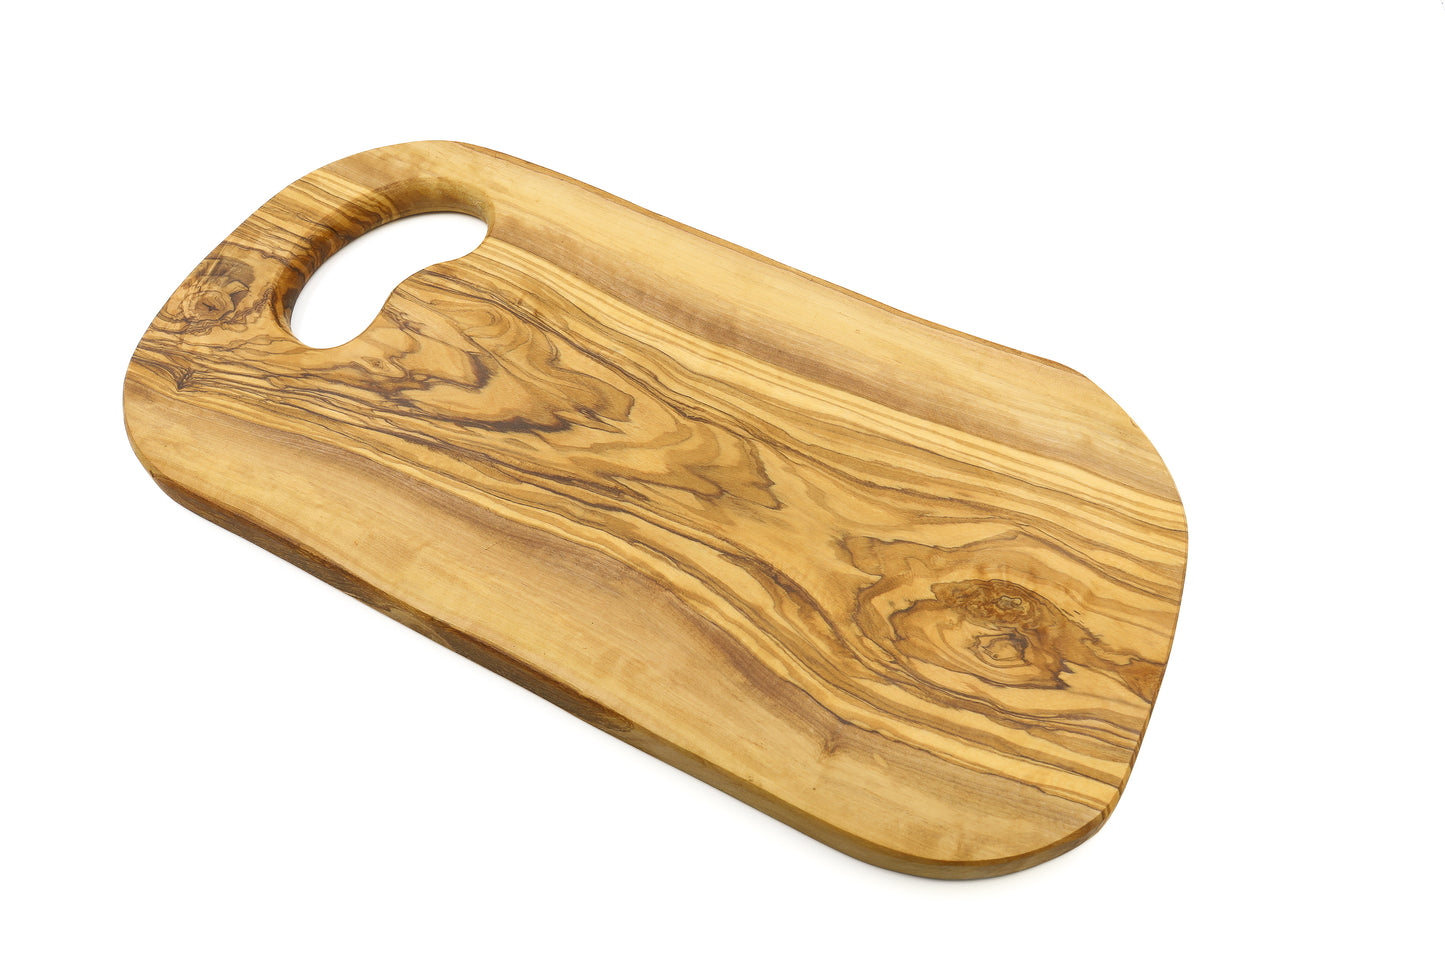 Handcrafted olive wood cutting board with an ergonomic in-hand handle